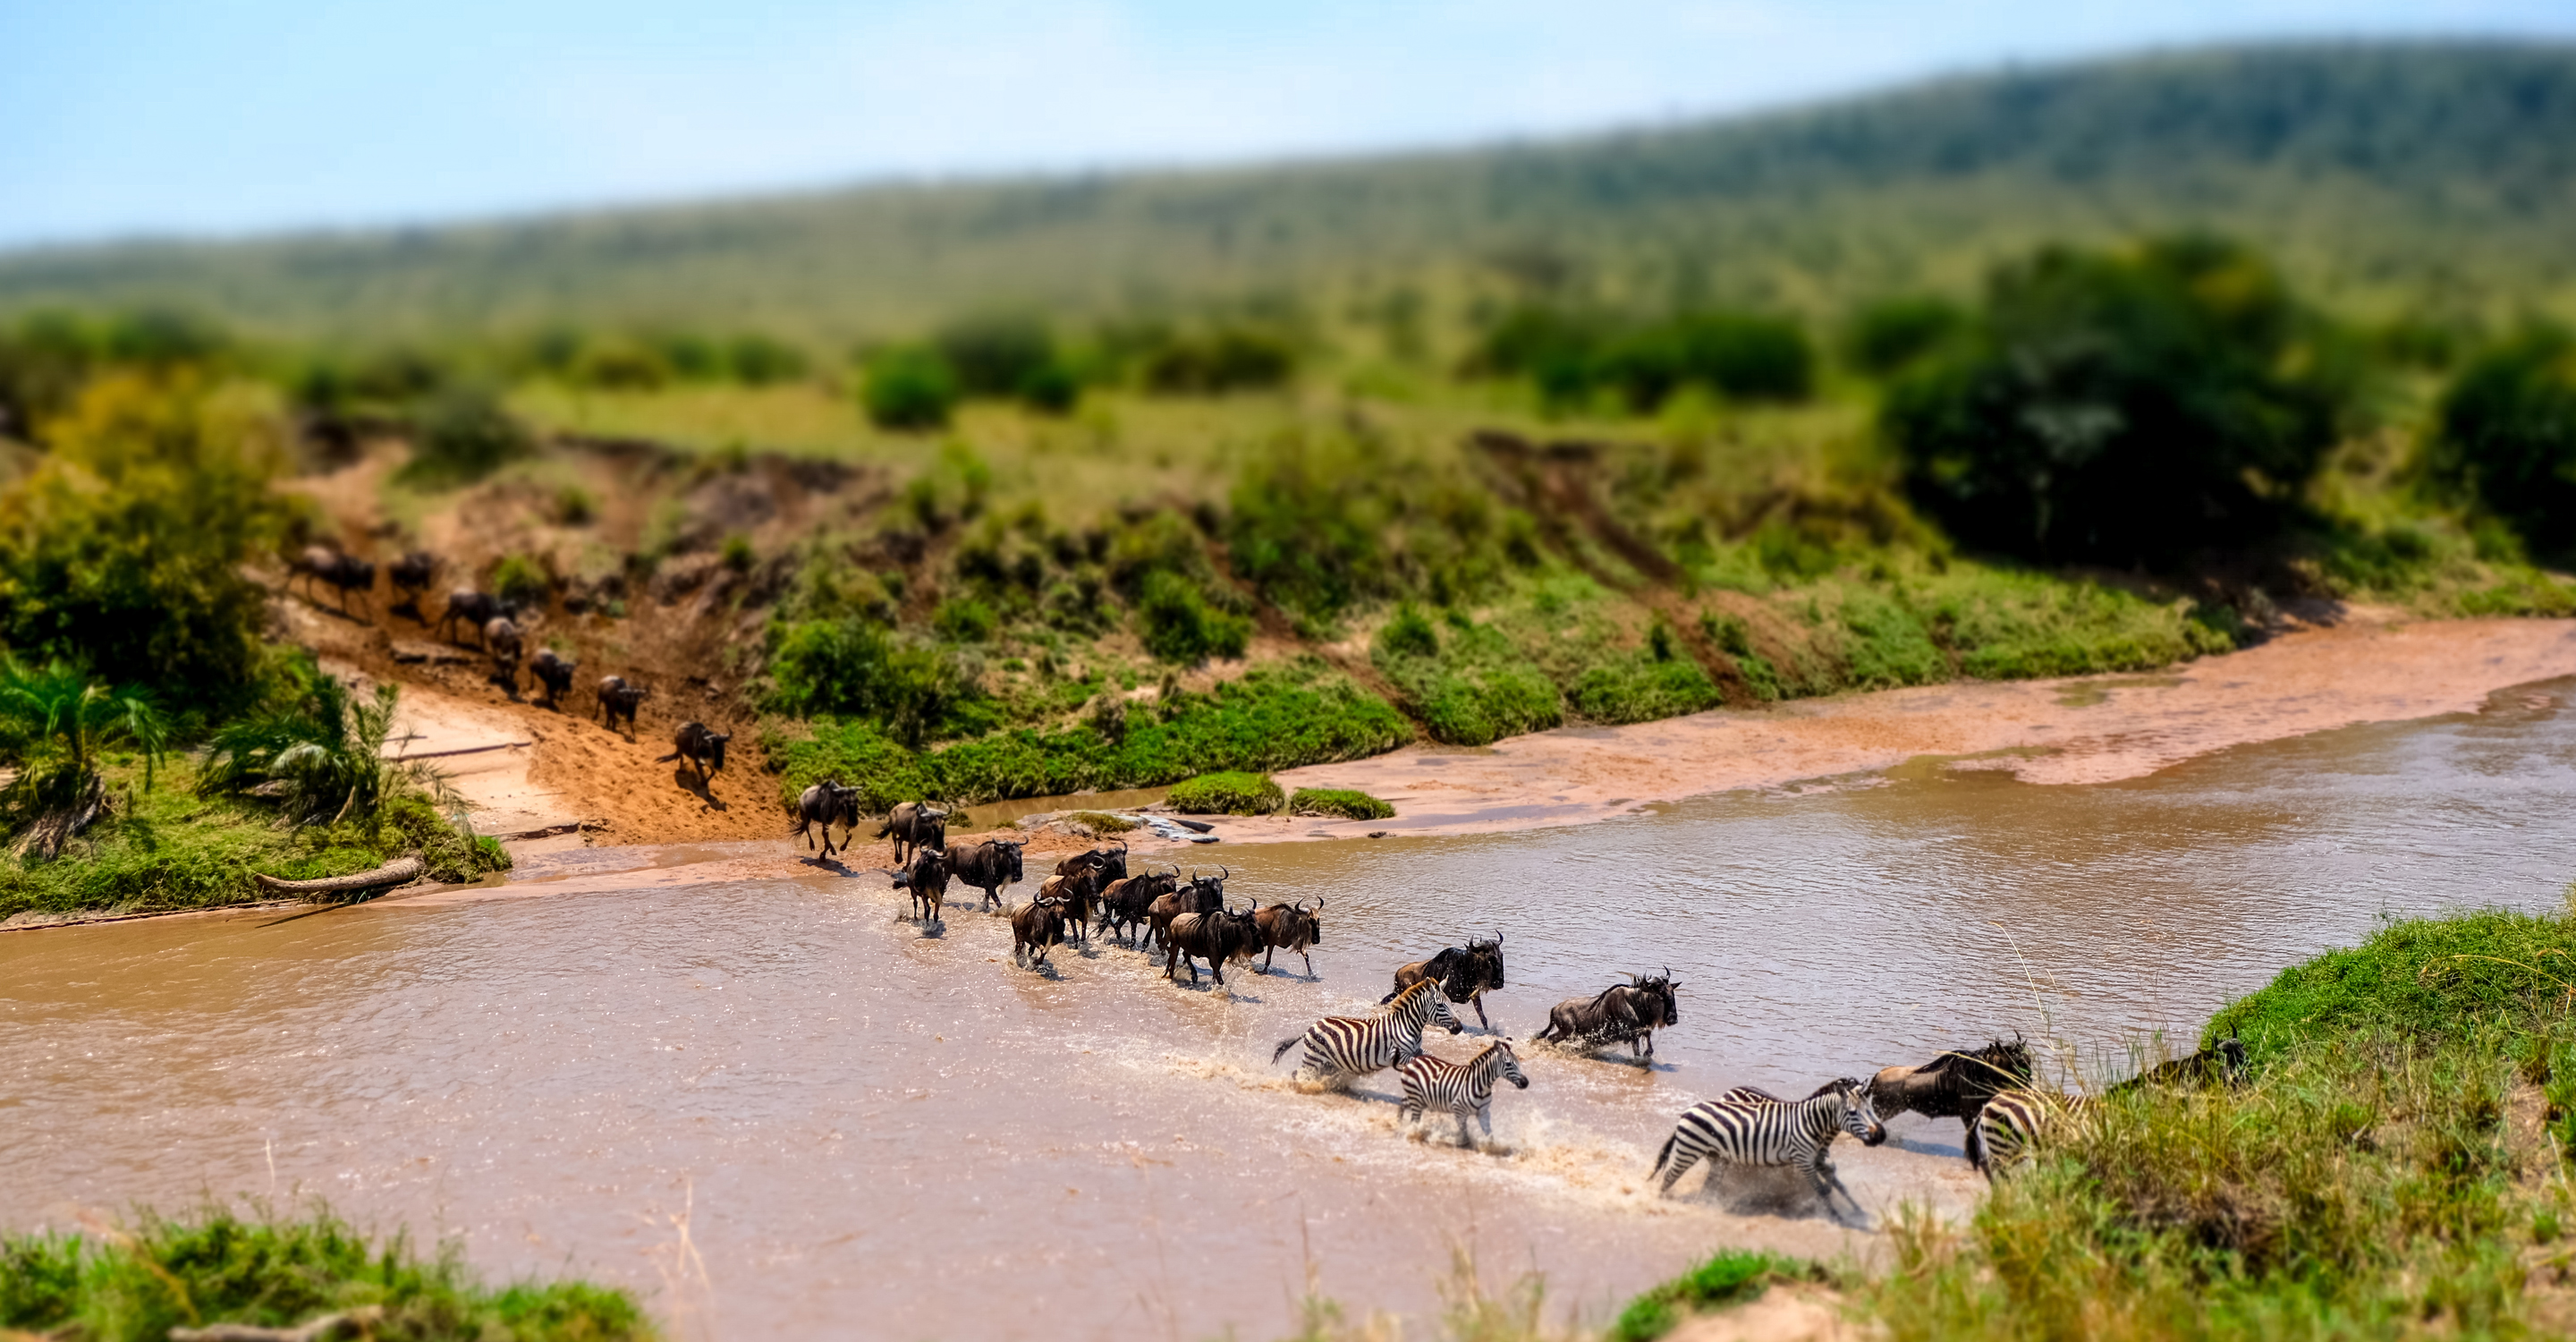 A herd of wildebeest and zebra cross the river during the great migration, Maasai Mara National Reserve, Kenya